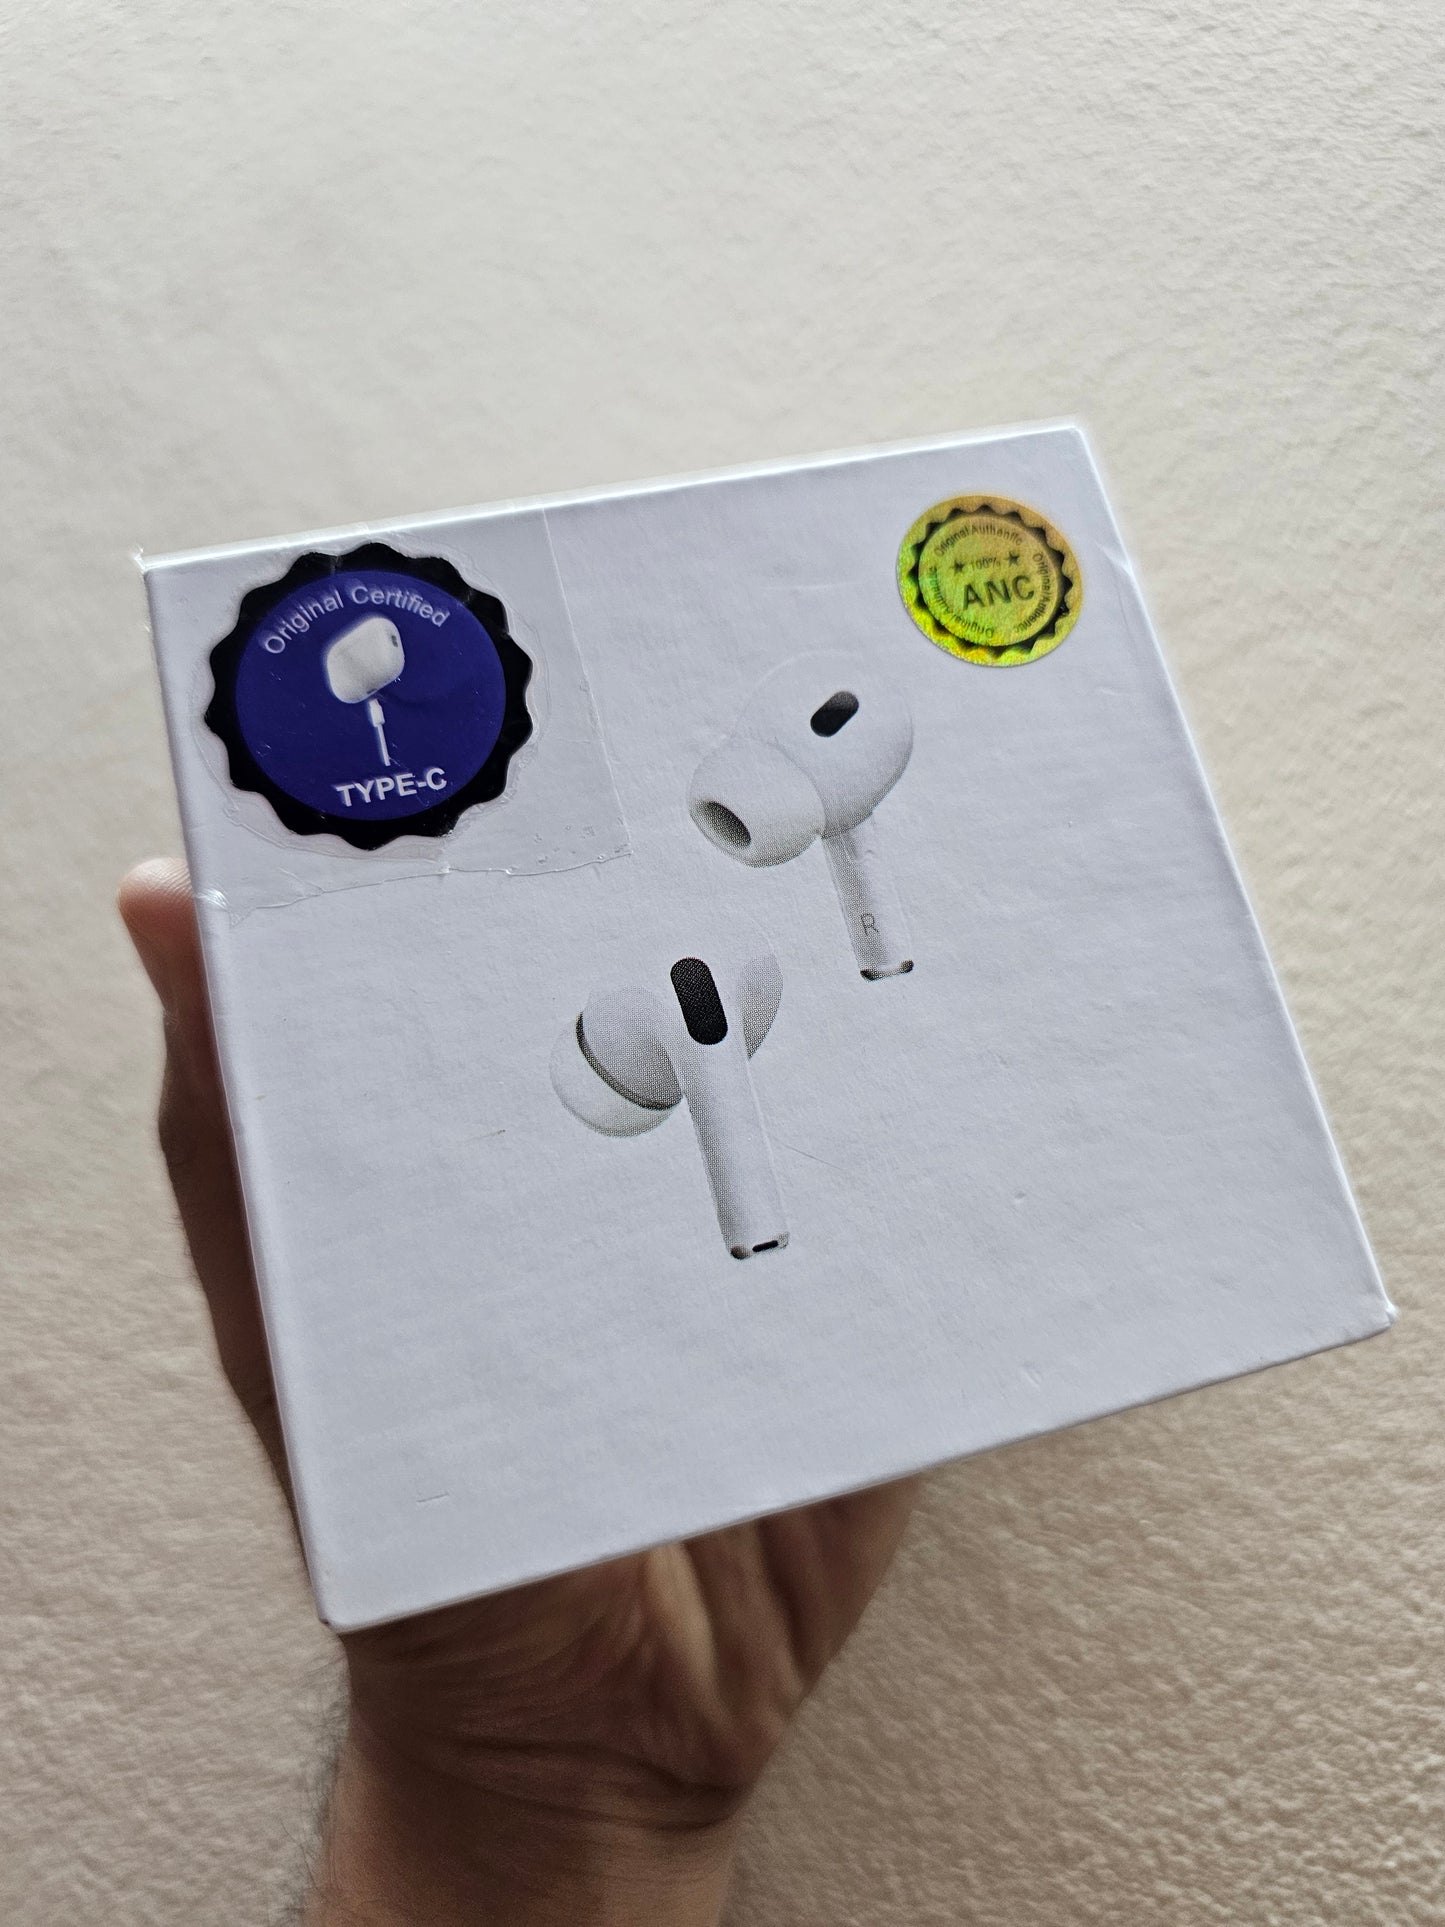 Airpods pro 2 Clone with all iOS features working - Compatible with all iPhones and Android Phones! Best Air pods Pro 2 Clone